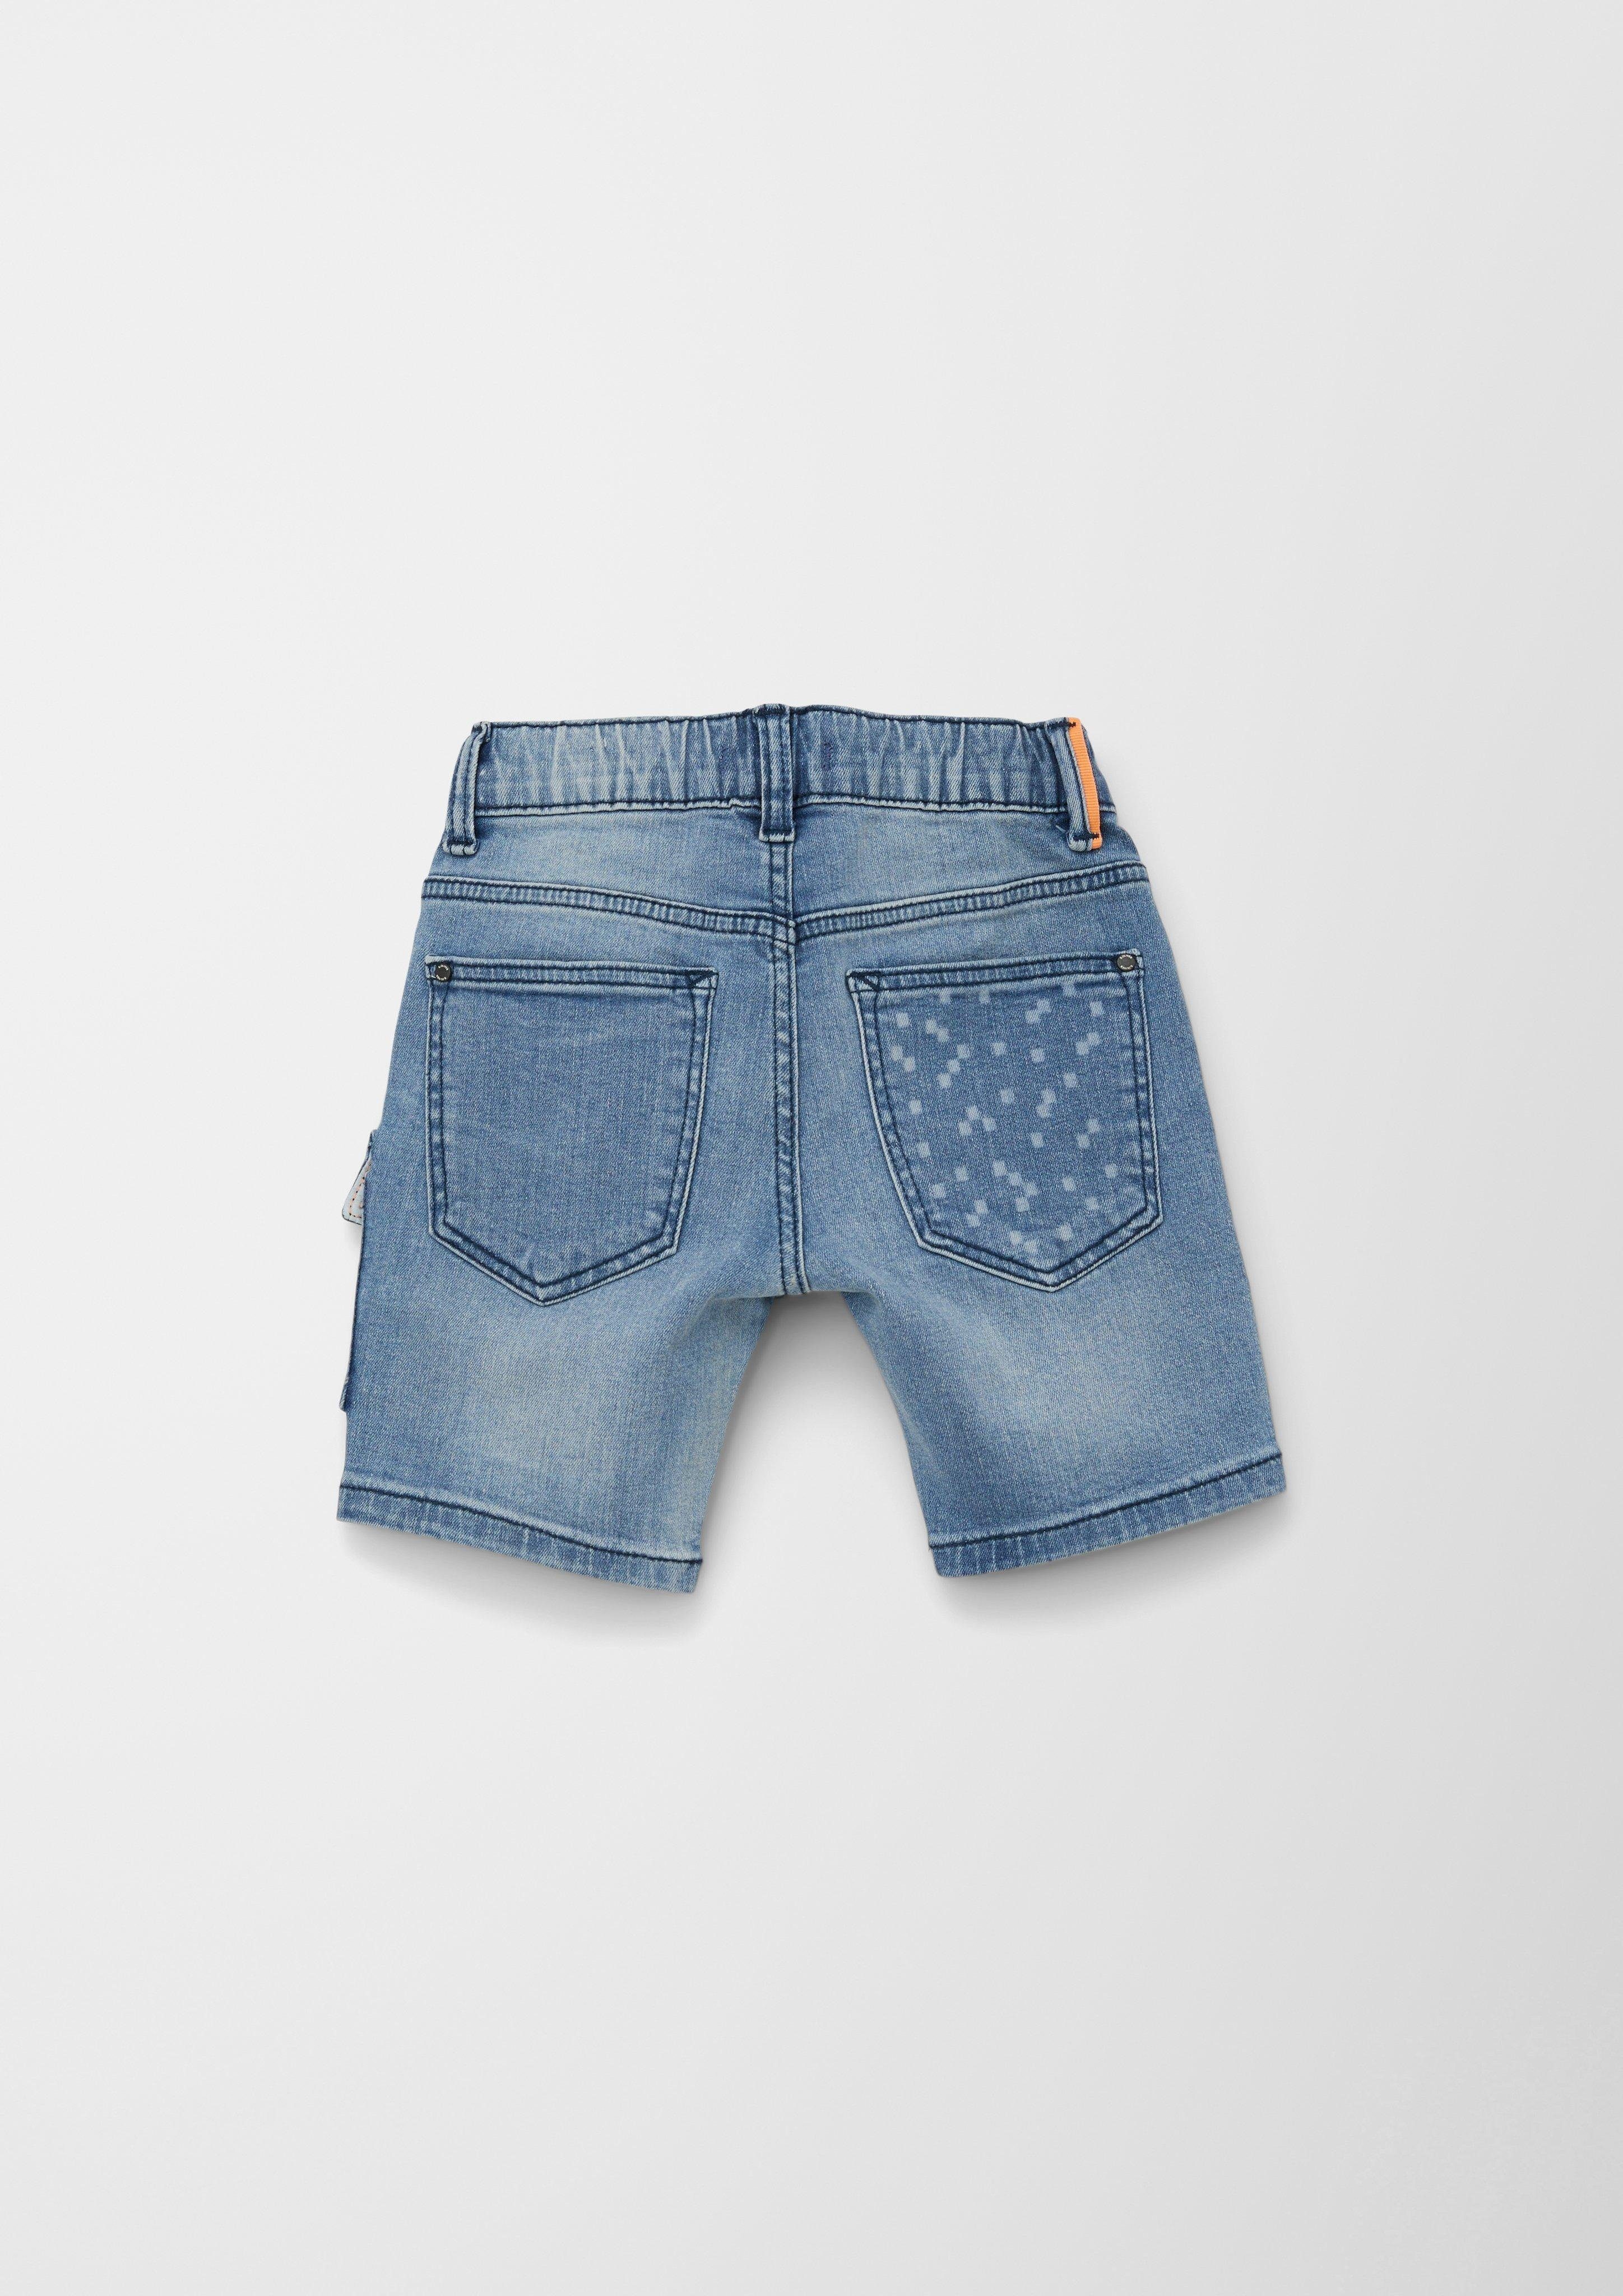 s.Oliver Jeansshorts Jeans-Bermuda Brad Mid Leg Fit Slim Tunnelzug, Rise Waschung Slim / / angedeuteter / Joggstyle